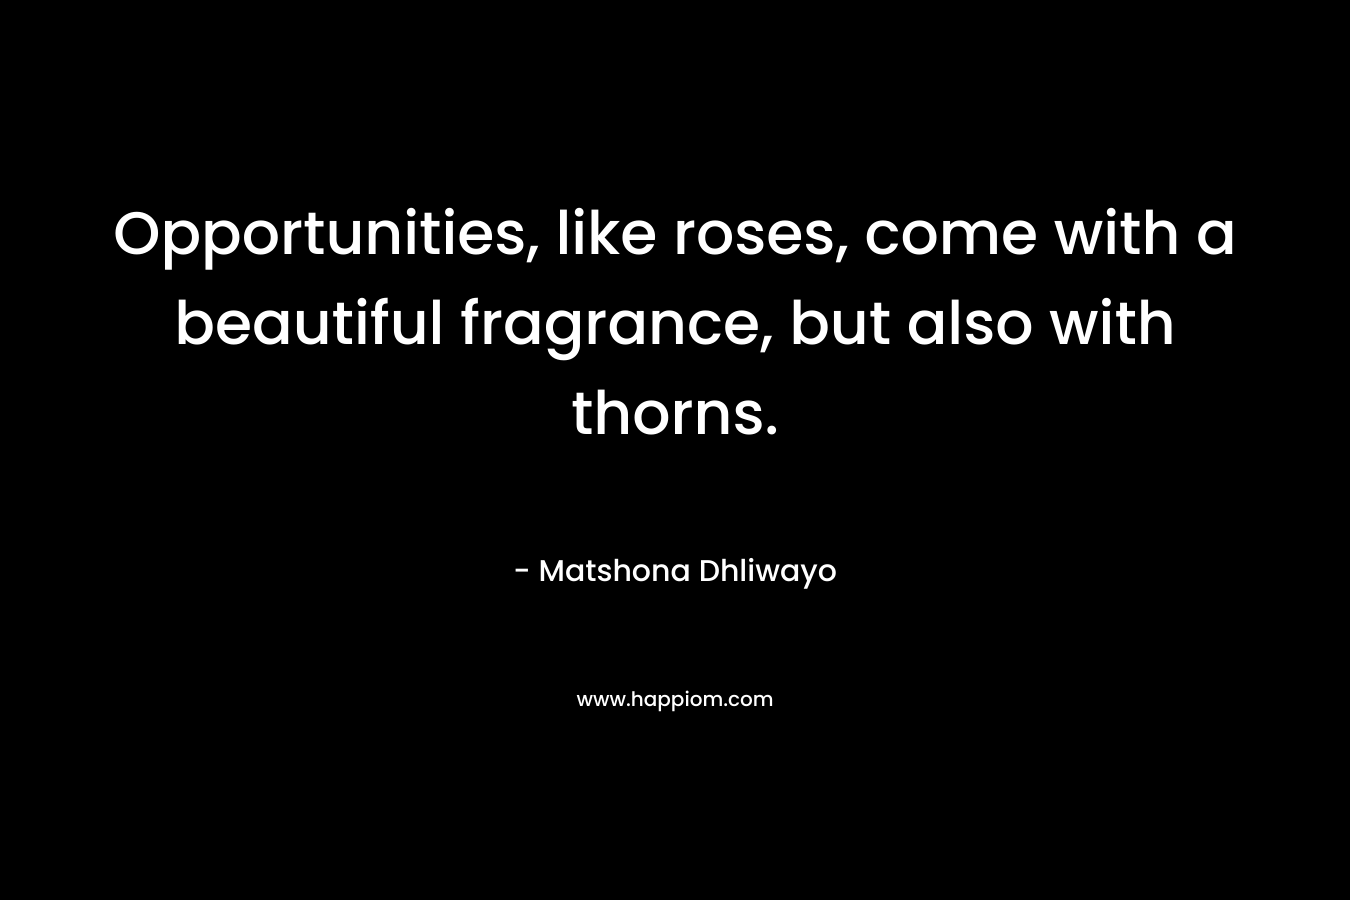 Opportunities, like roses, come with a beautiful fragrance, but also with thorns.